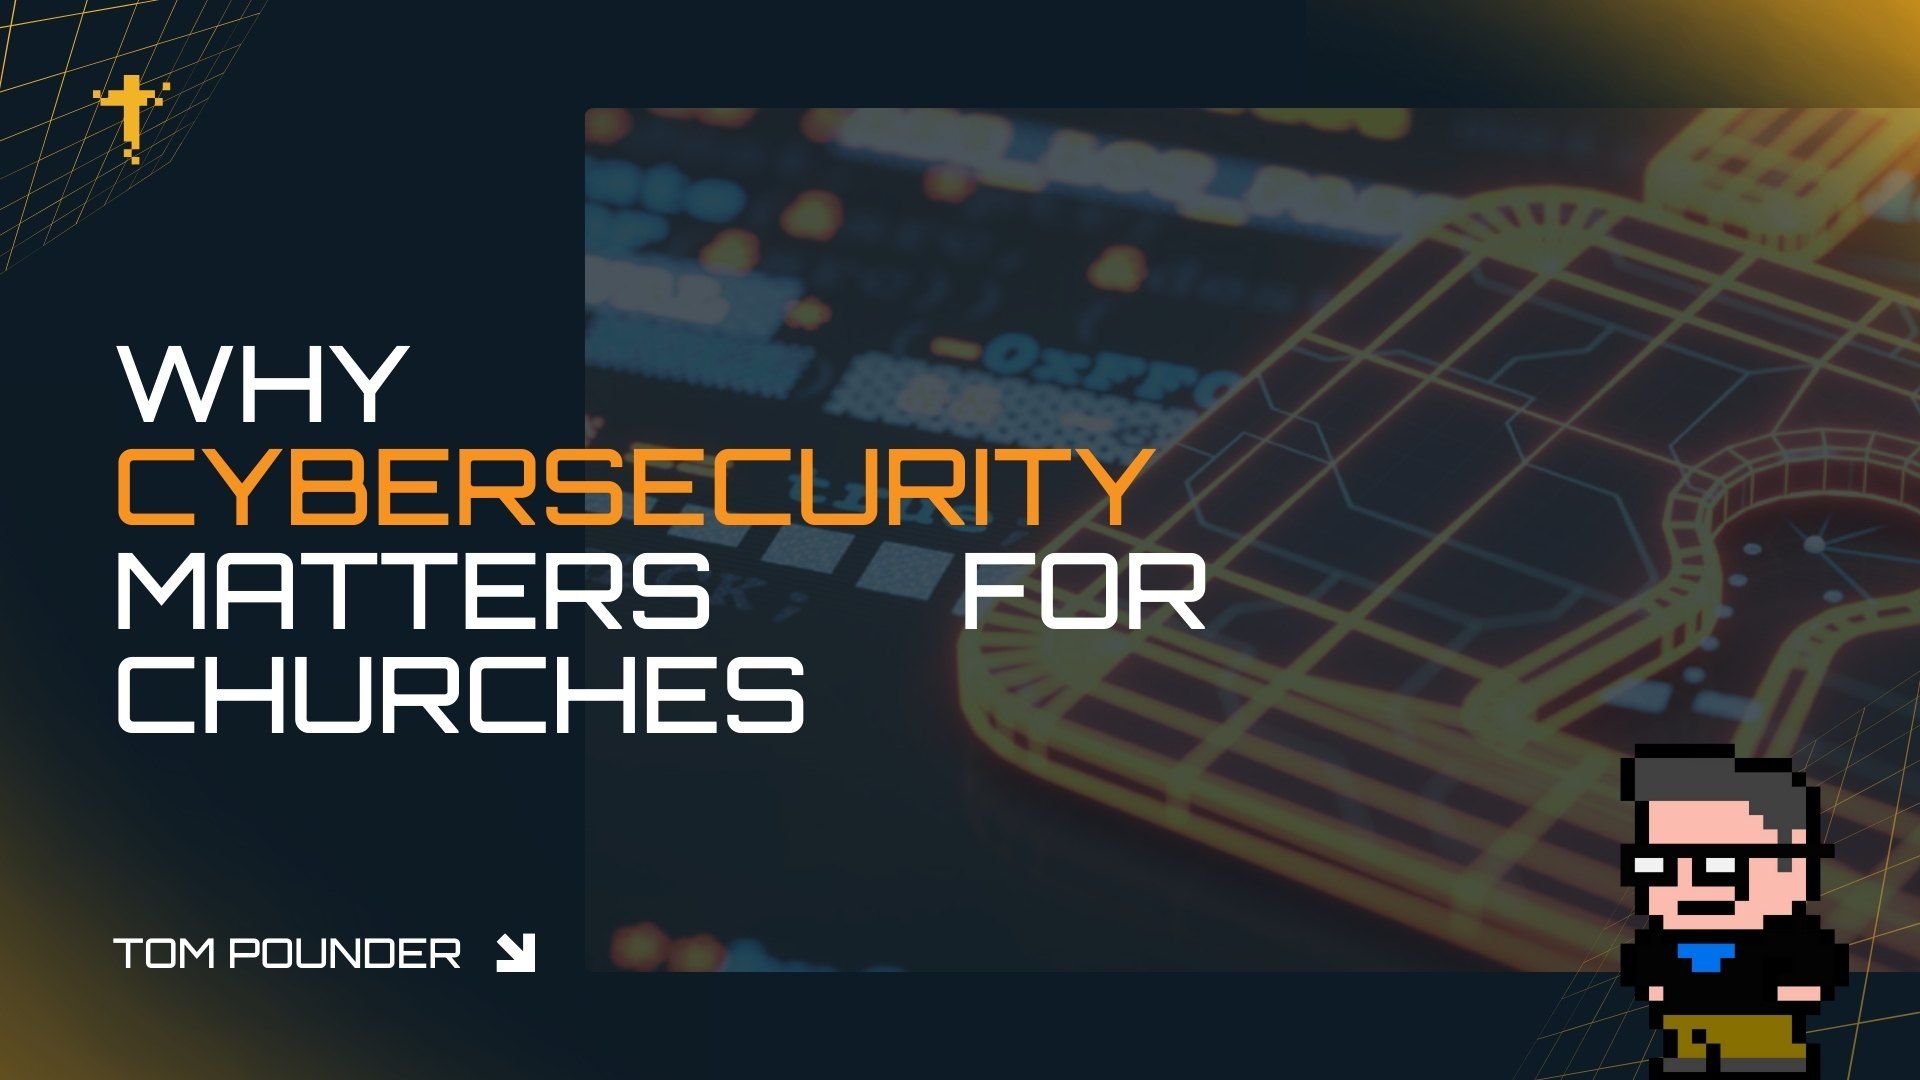 Why Cybersecurity Matters for Churches